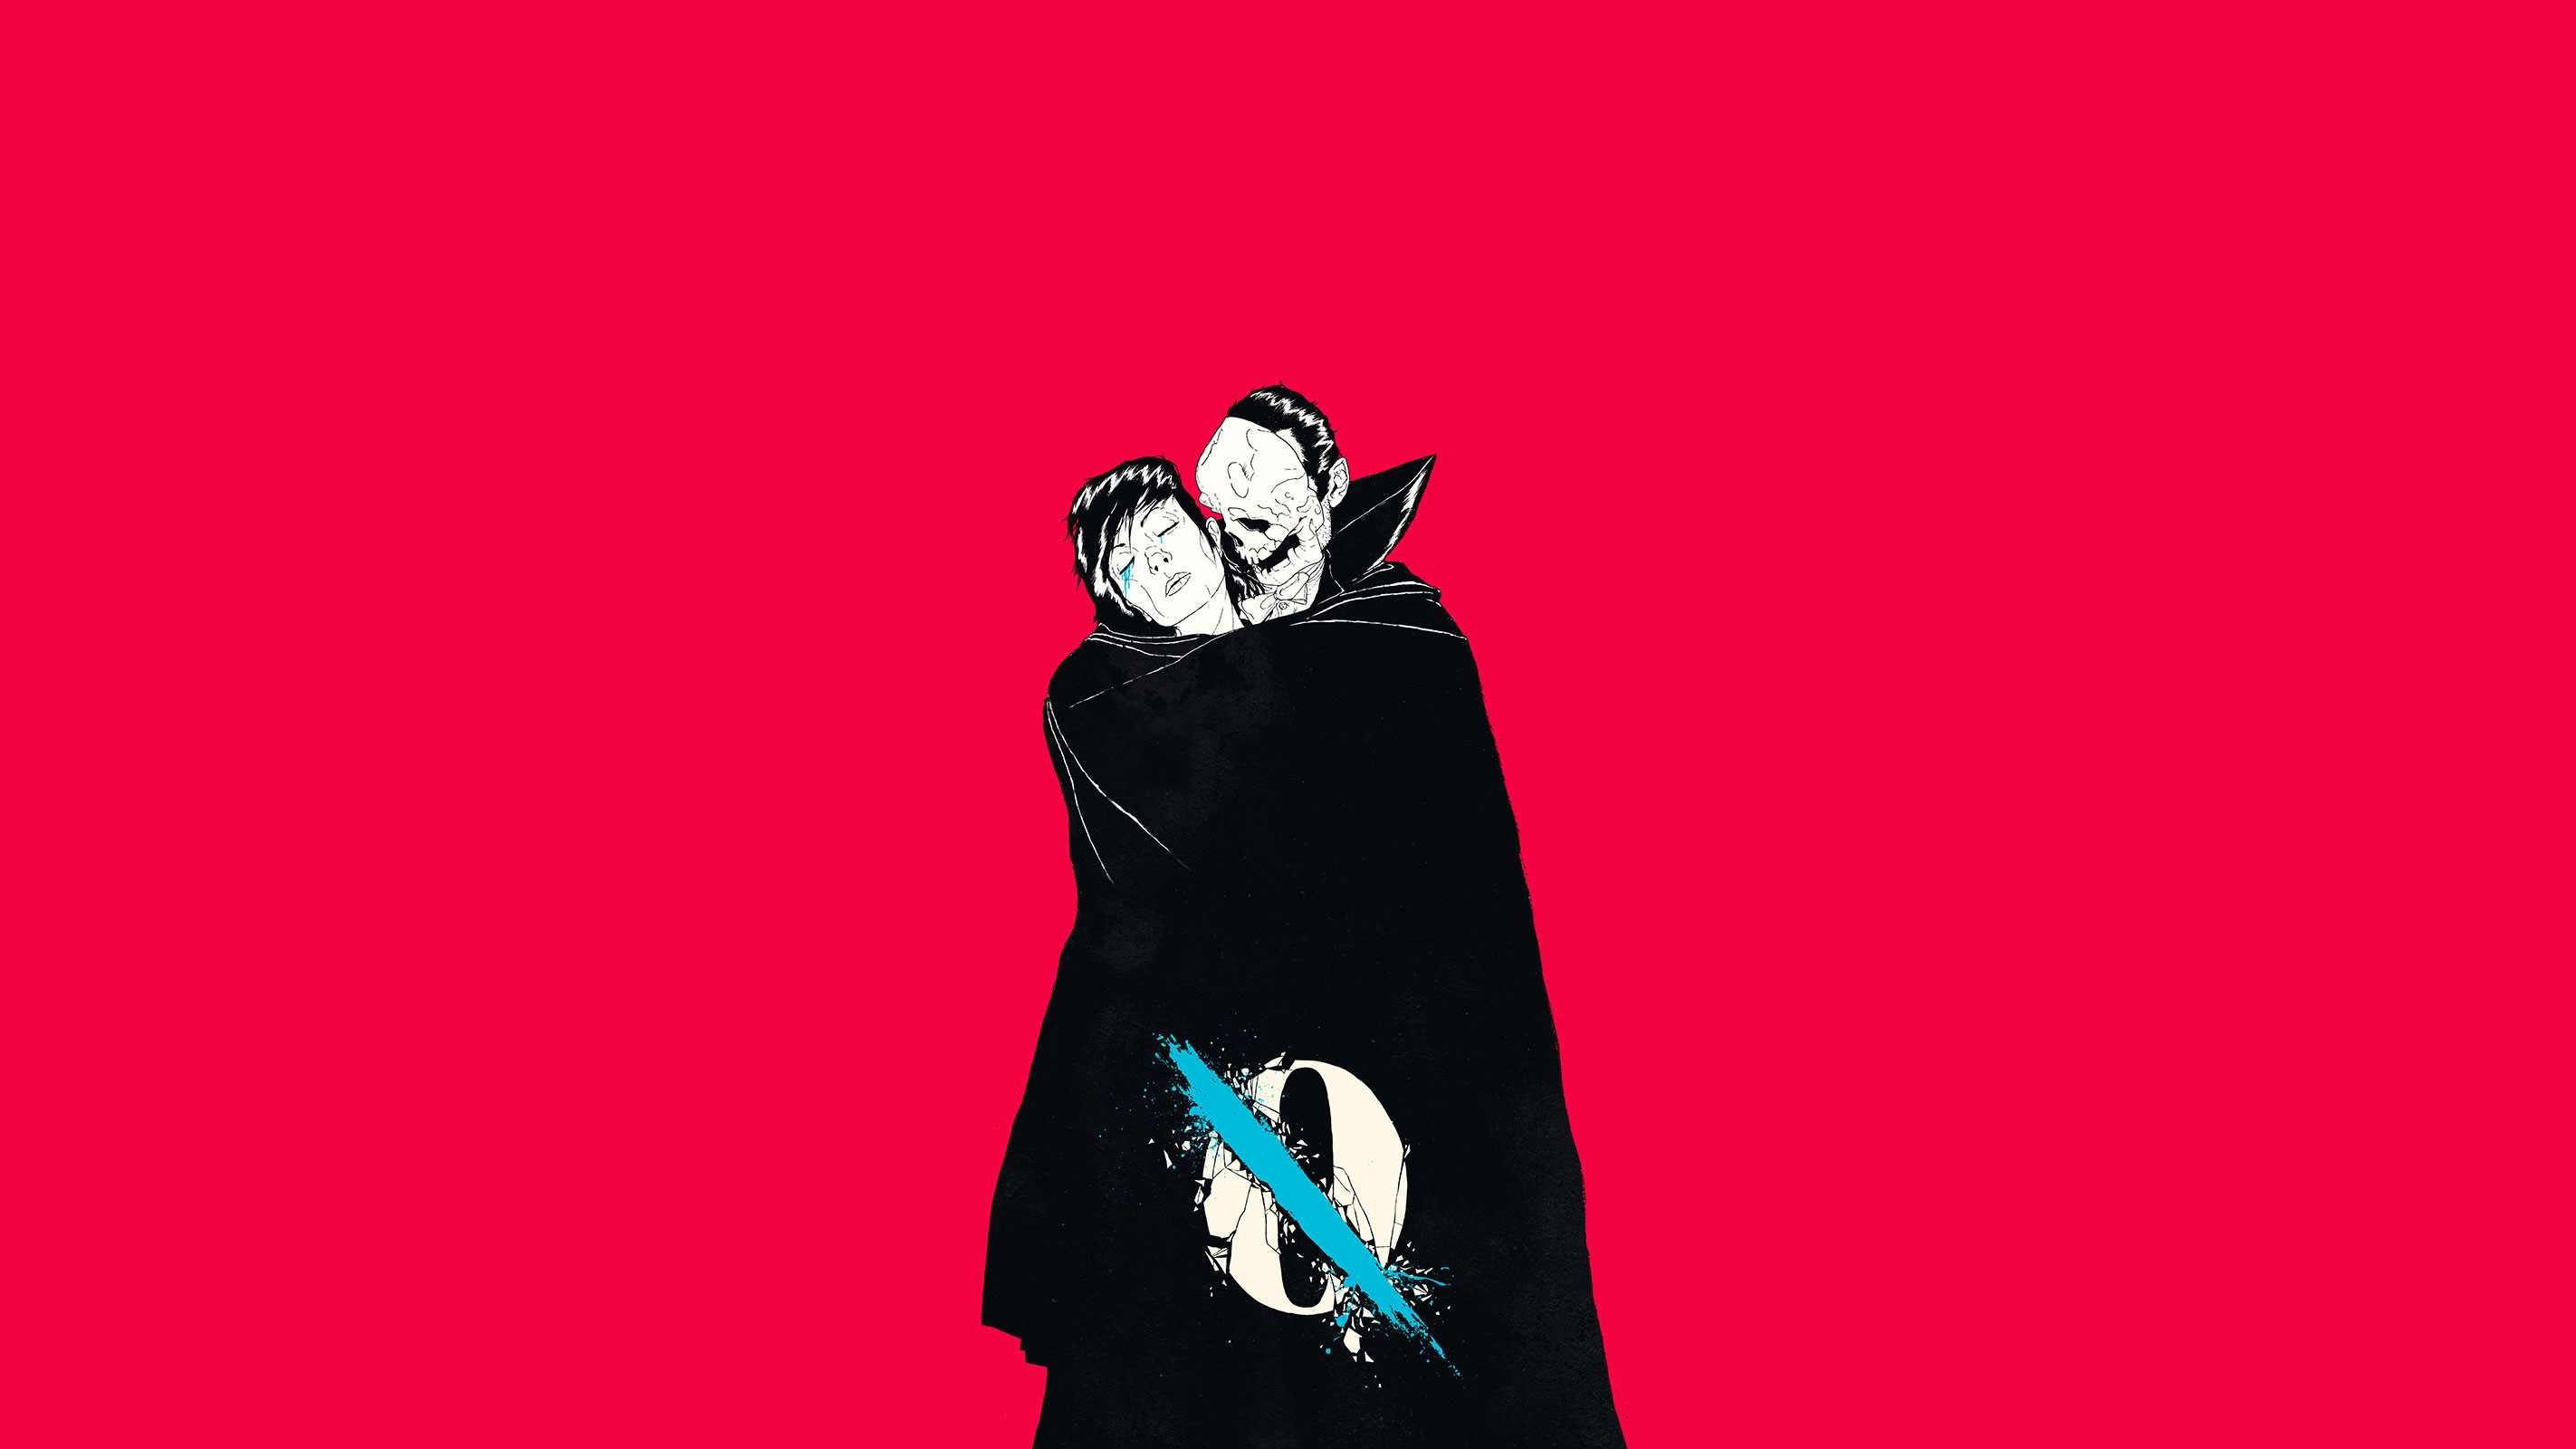 Metal Music Queens Of The Stone Age Album Covers Pink 2845x1600